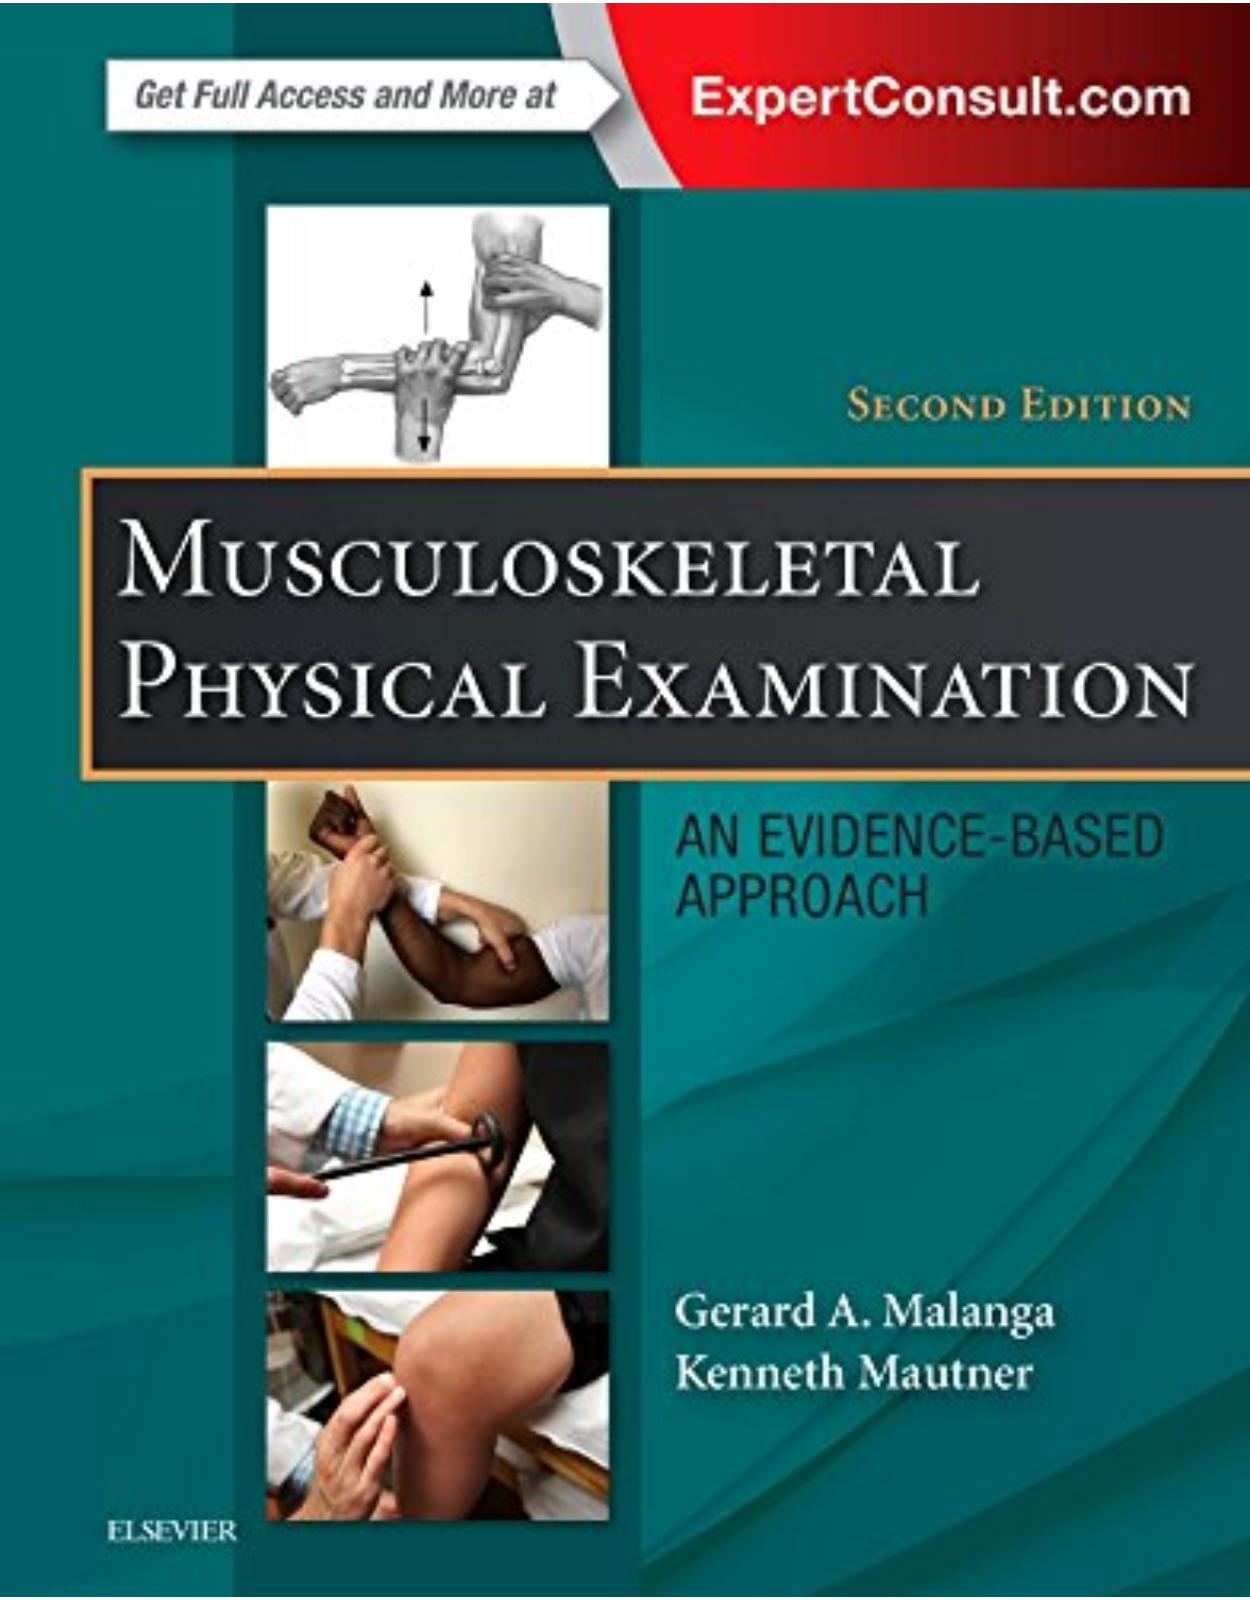 Musculoskeletal Physical Examination: An Evidence-Based Approach, 2e